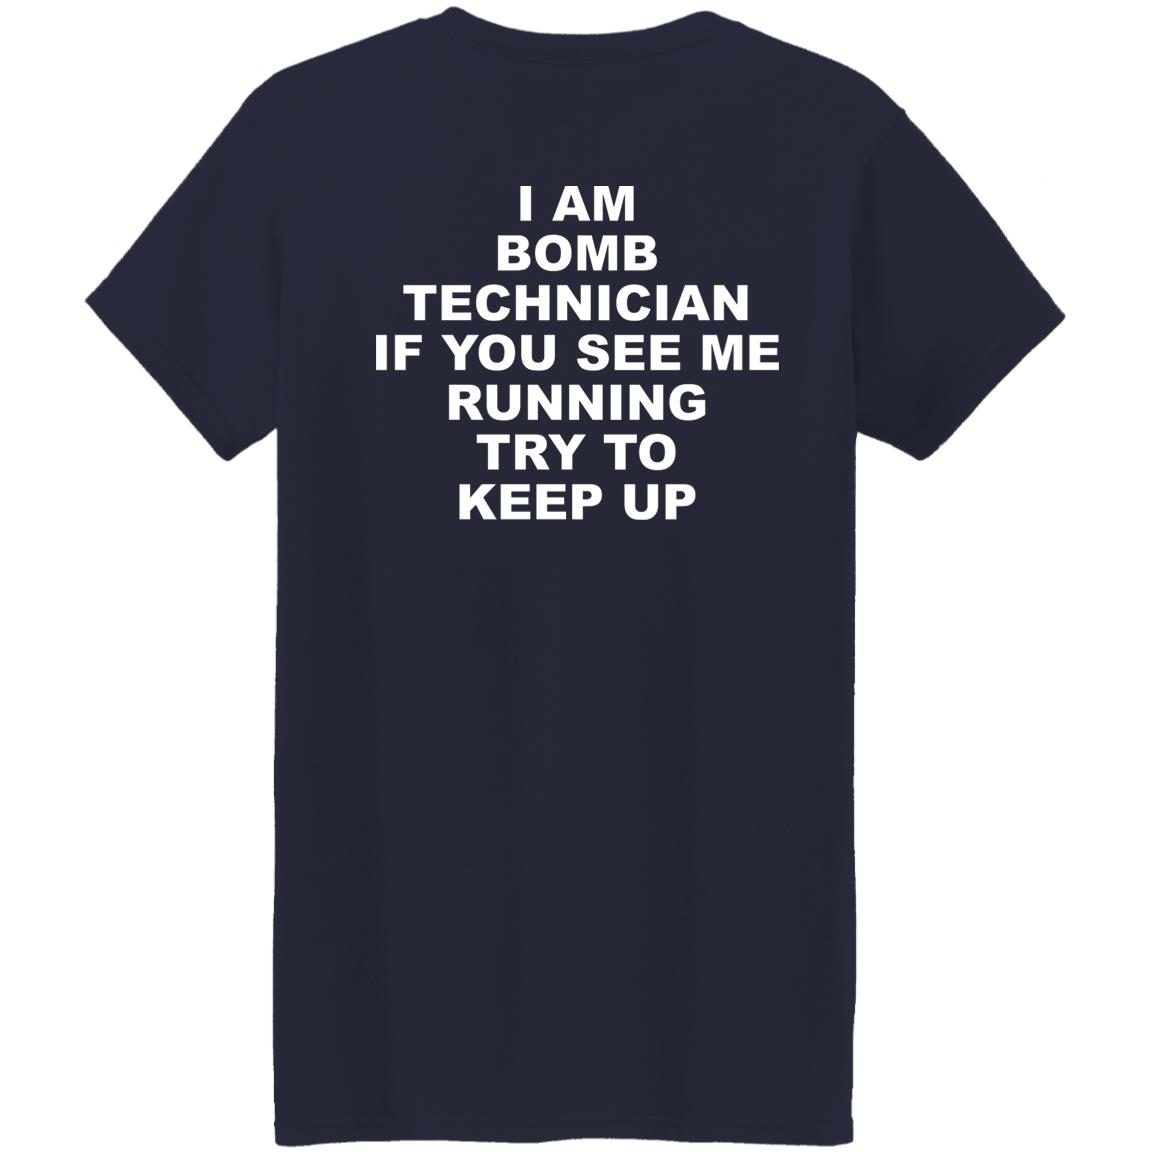 I Am Bomb Technician If You See Me Running Try To Keep Up shirt 3